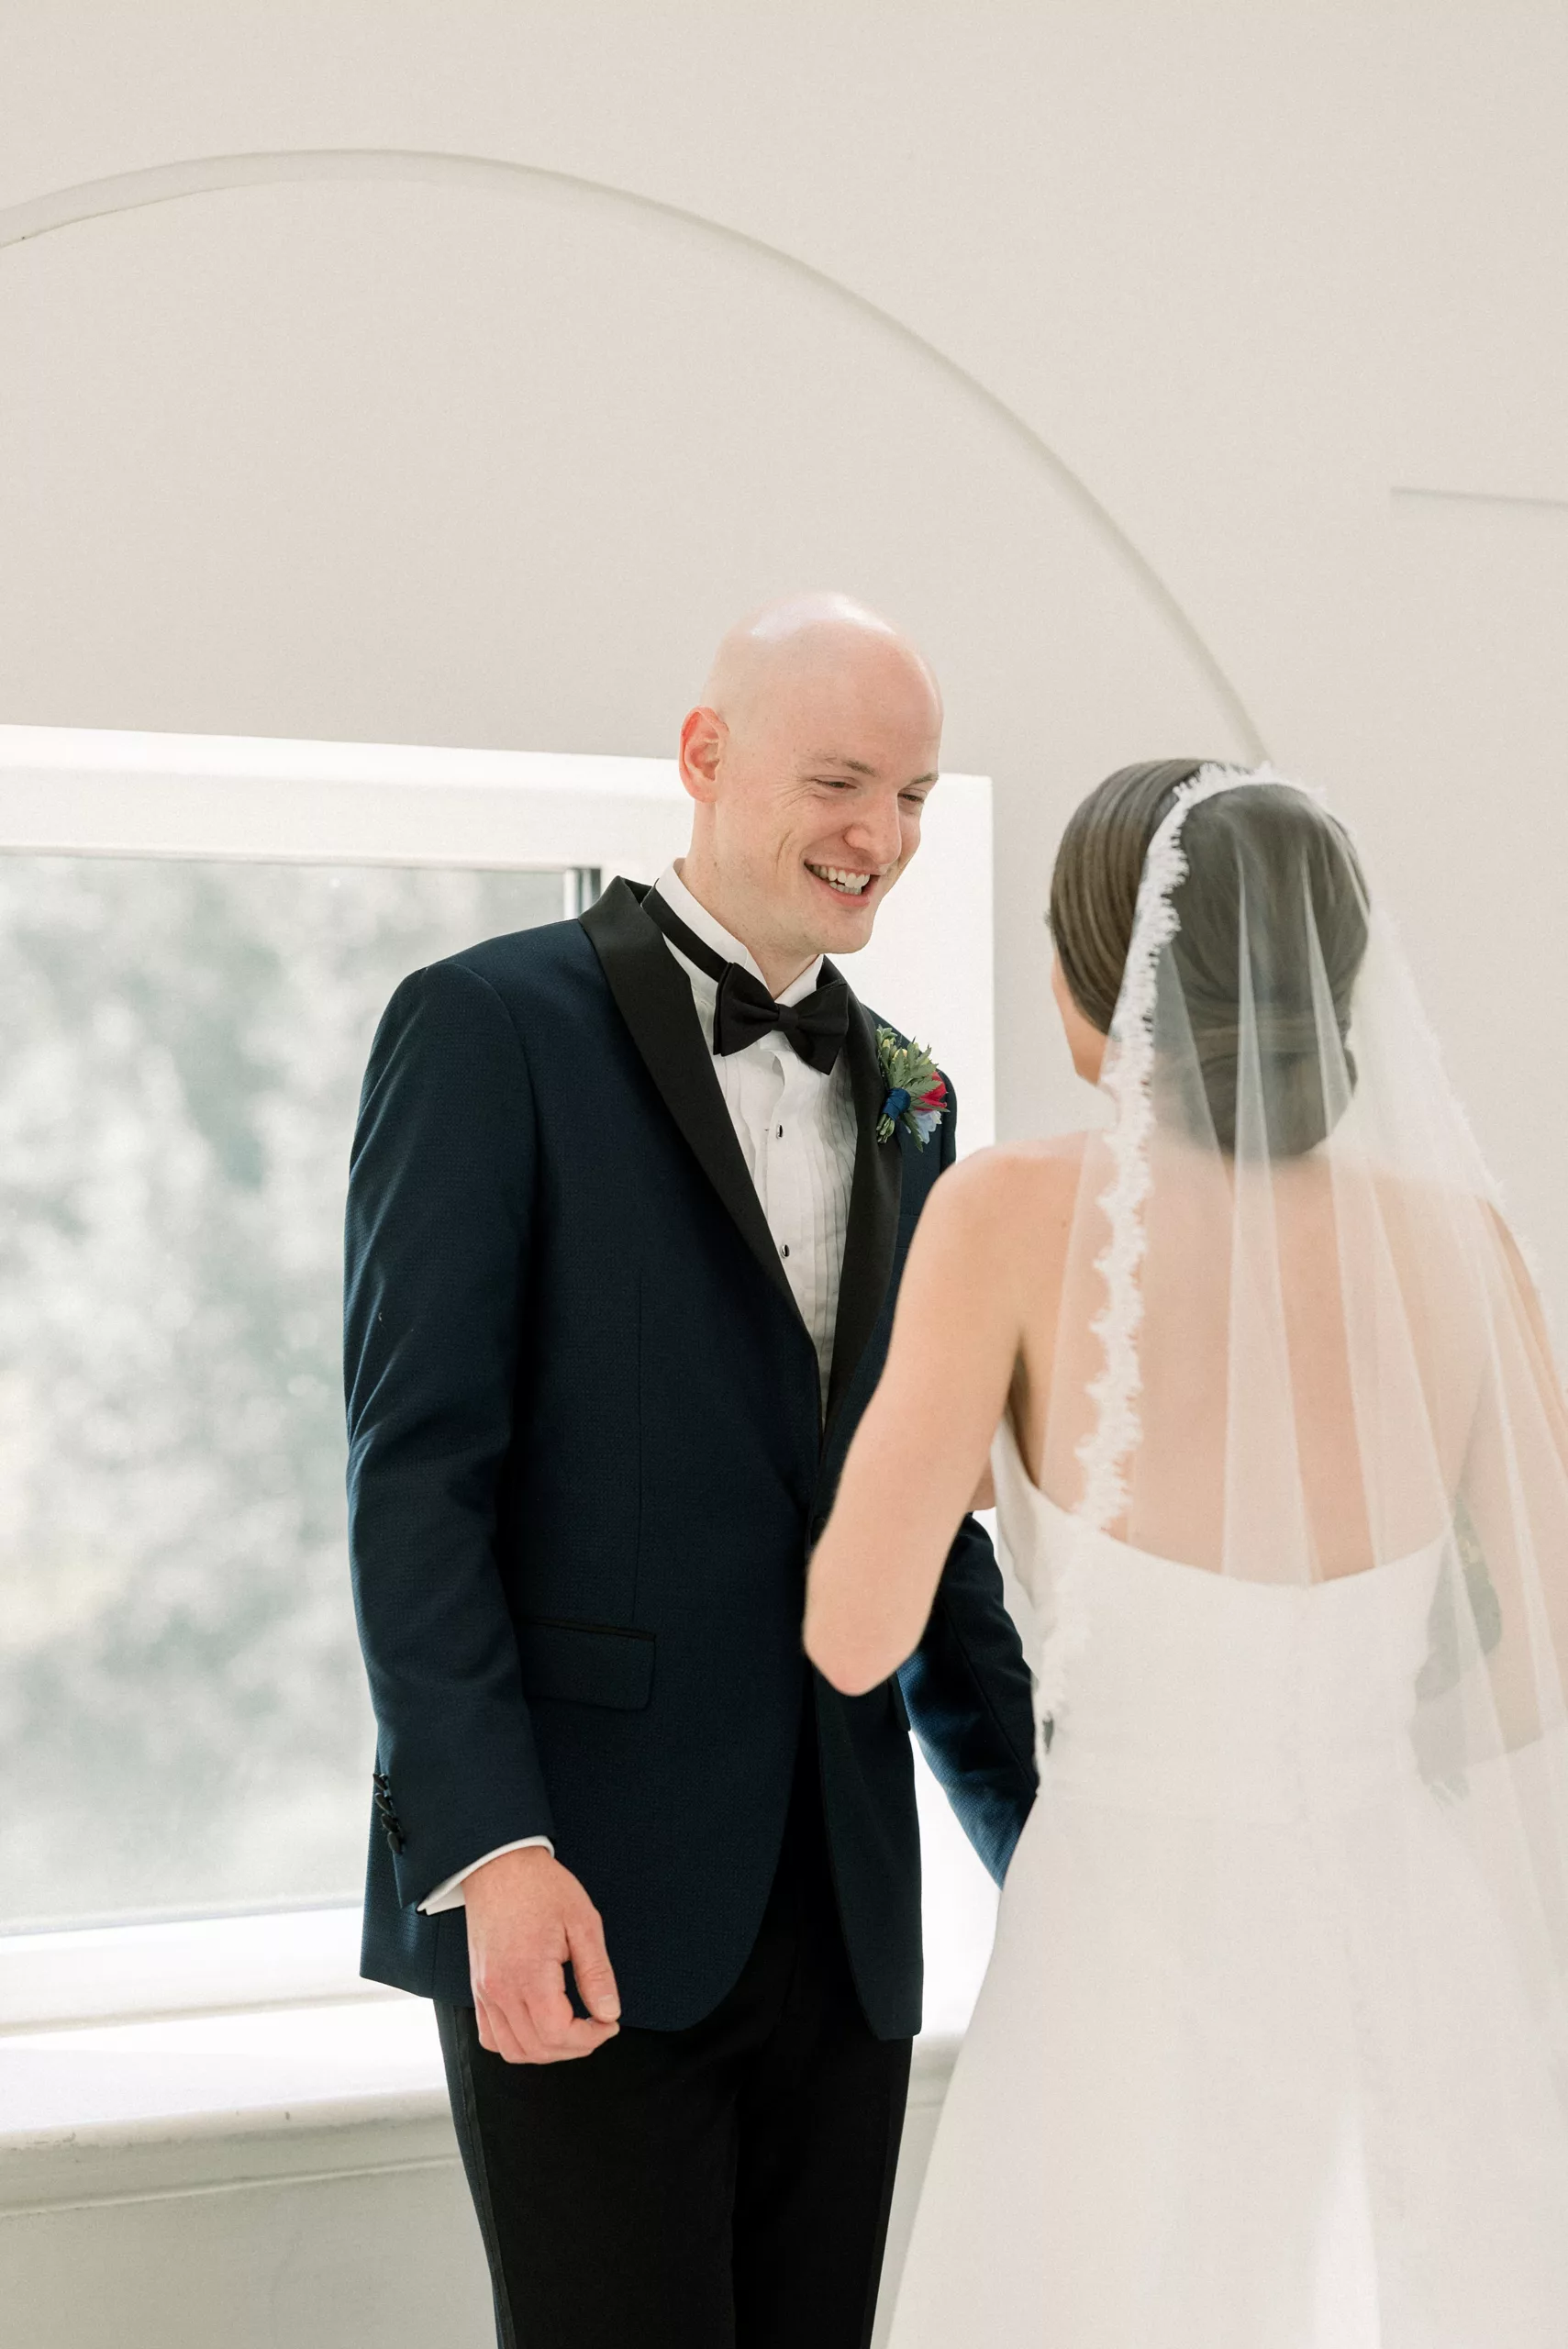 A groom smiles big as he sees his bride in her dress in a white room in front of a window